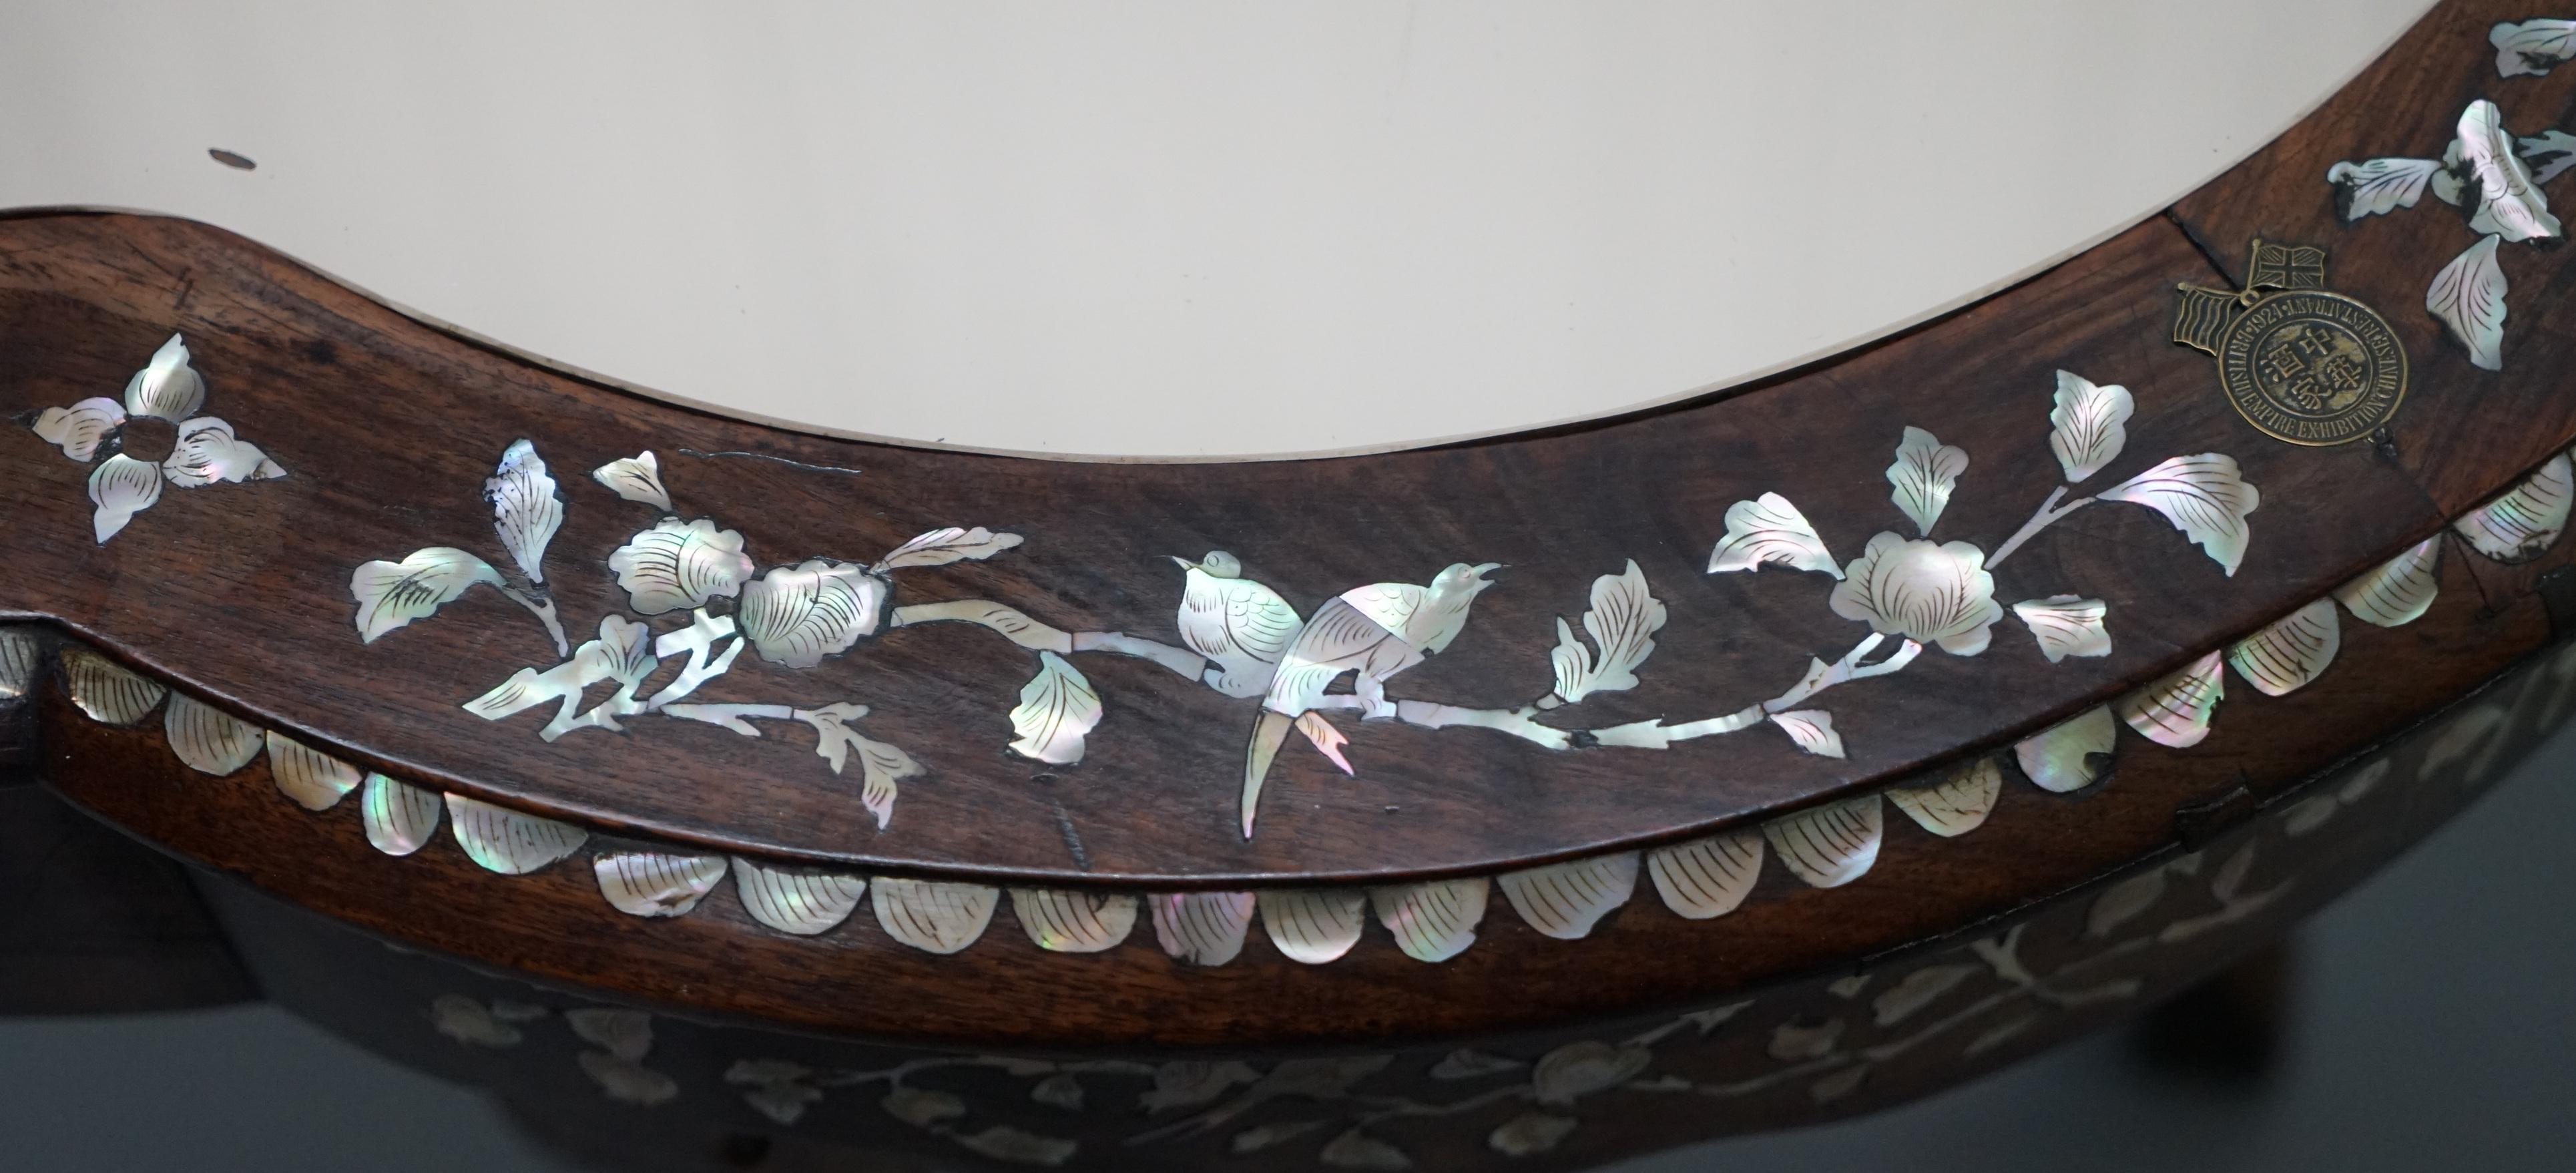 Early 20th Century 1924 British Empire Chinese Exhibition Rosewood & Mother of Pearl Inlaid Table